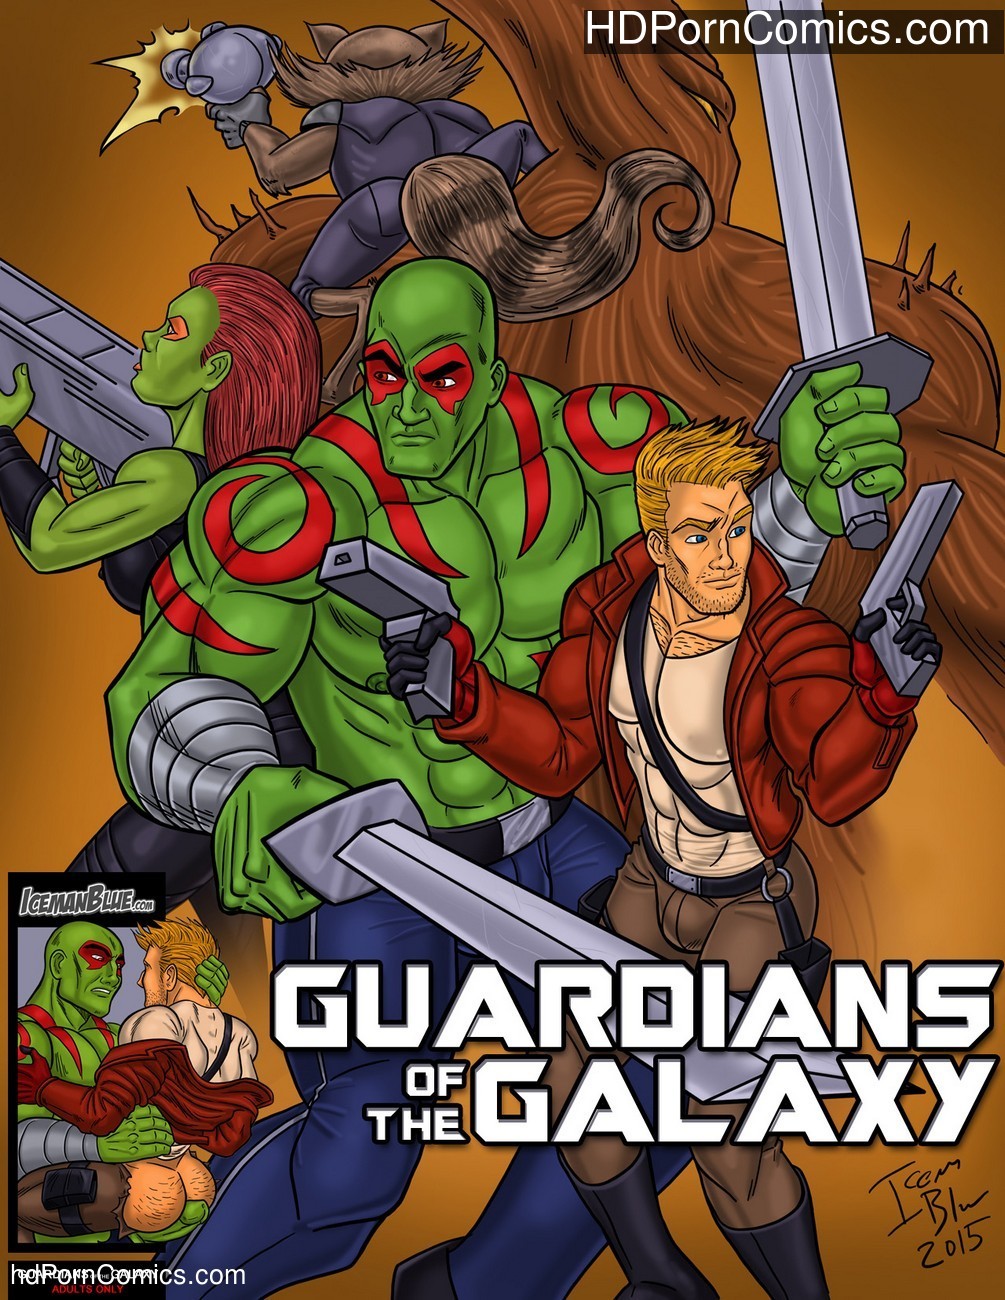 Guardians the galaxy